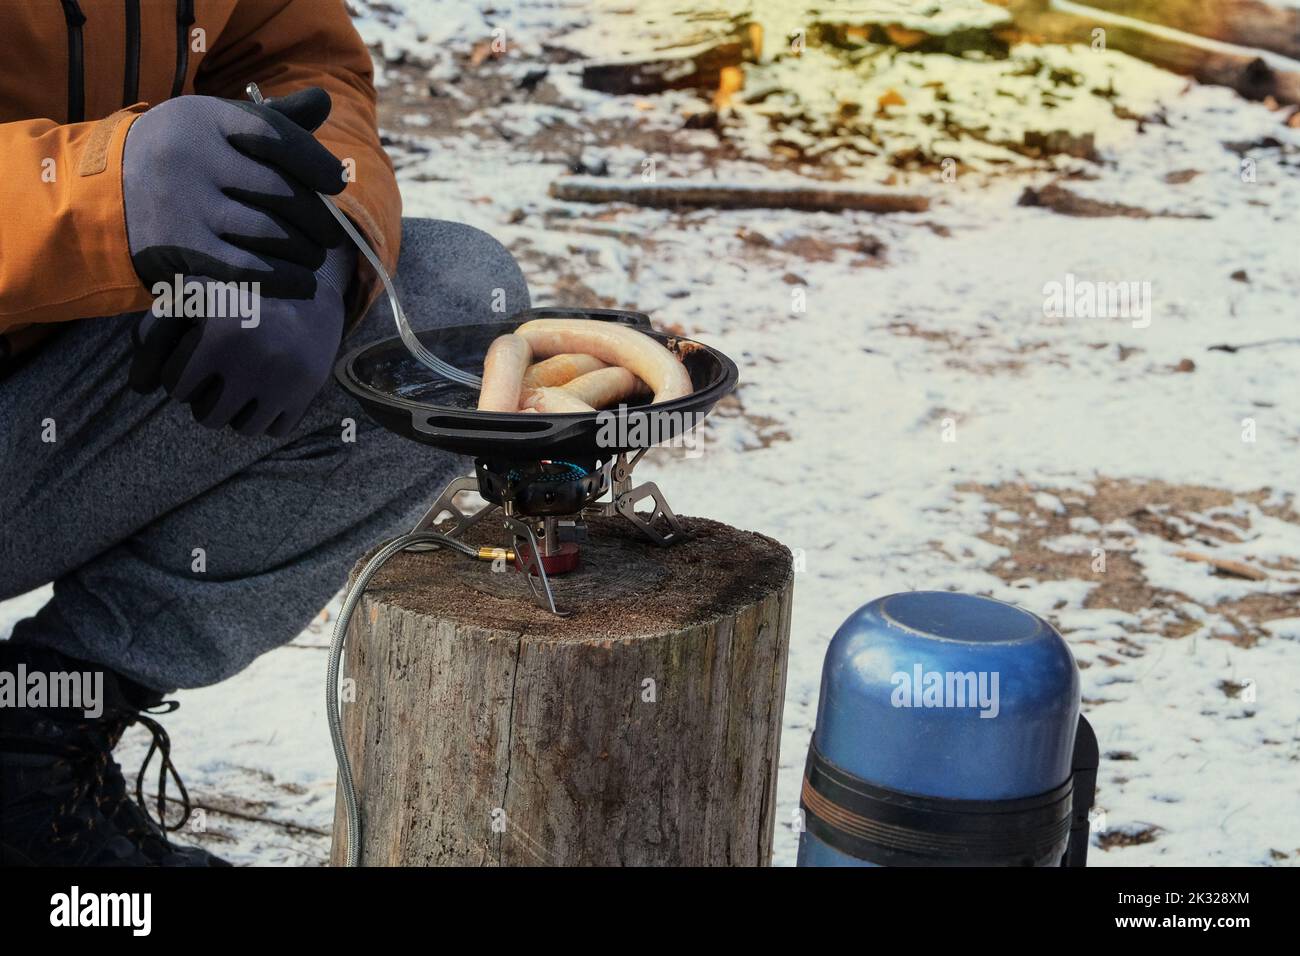 Camping food making. Foods in outdoor activities. Sausages in bowler in the forest in winter. Stock Photo